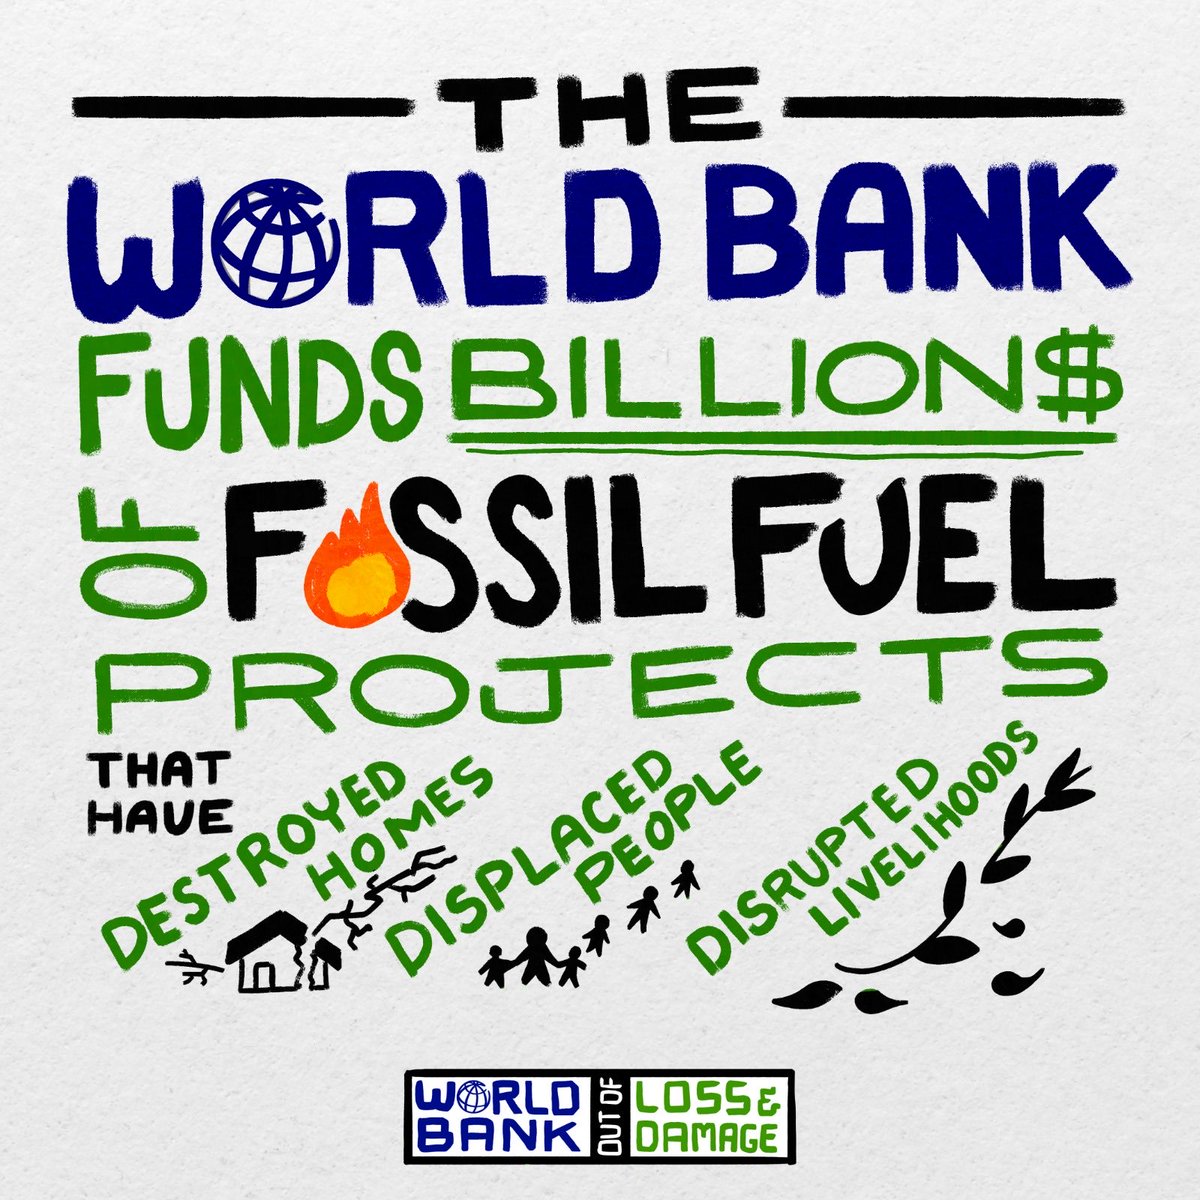 The US says that the World Bank should control the #LossAndDamageFund. 

WE SAY NO! 🚫 The WB:
👉 funds fossil fuel projects
👉 plunges nations into debt
👉 limits people's participation

A WB-led LDF will mean more GHG emissions, poverty, & people's exclusion.

#WBOutOfLDF!